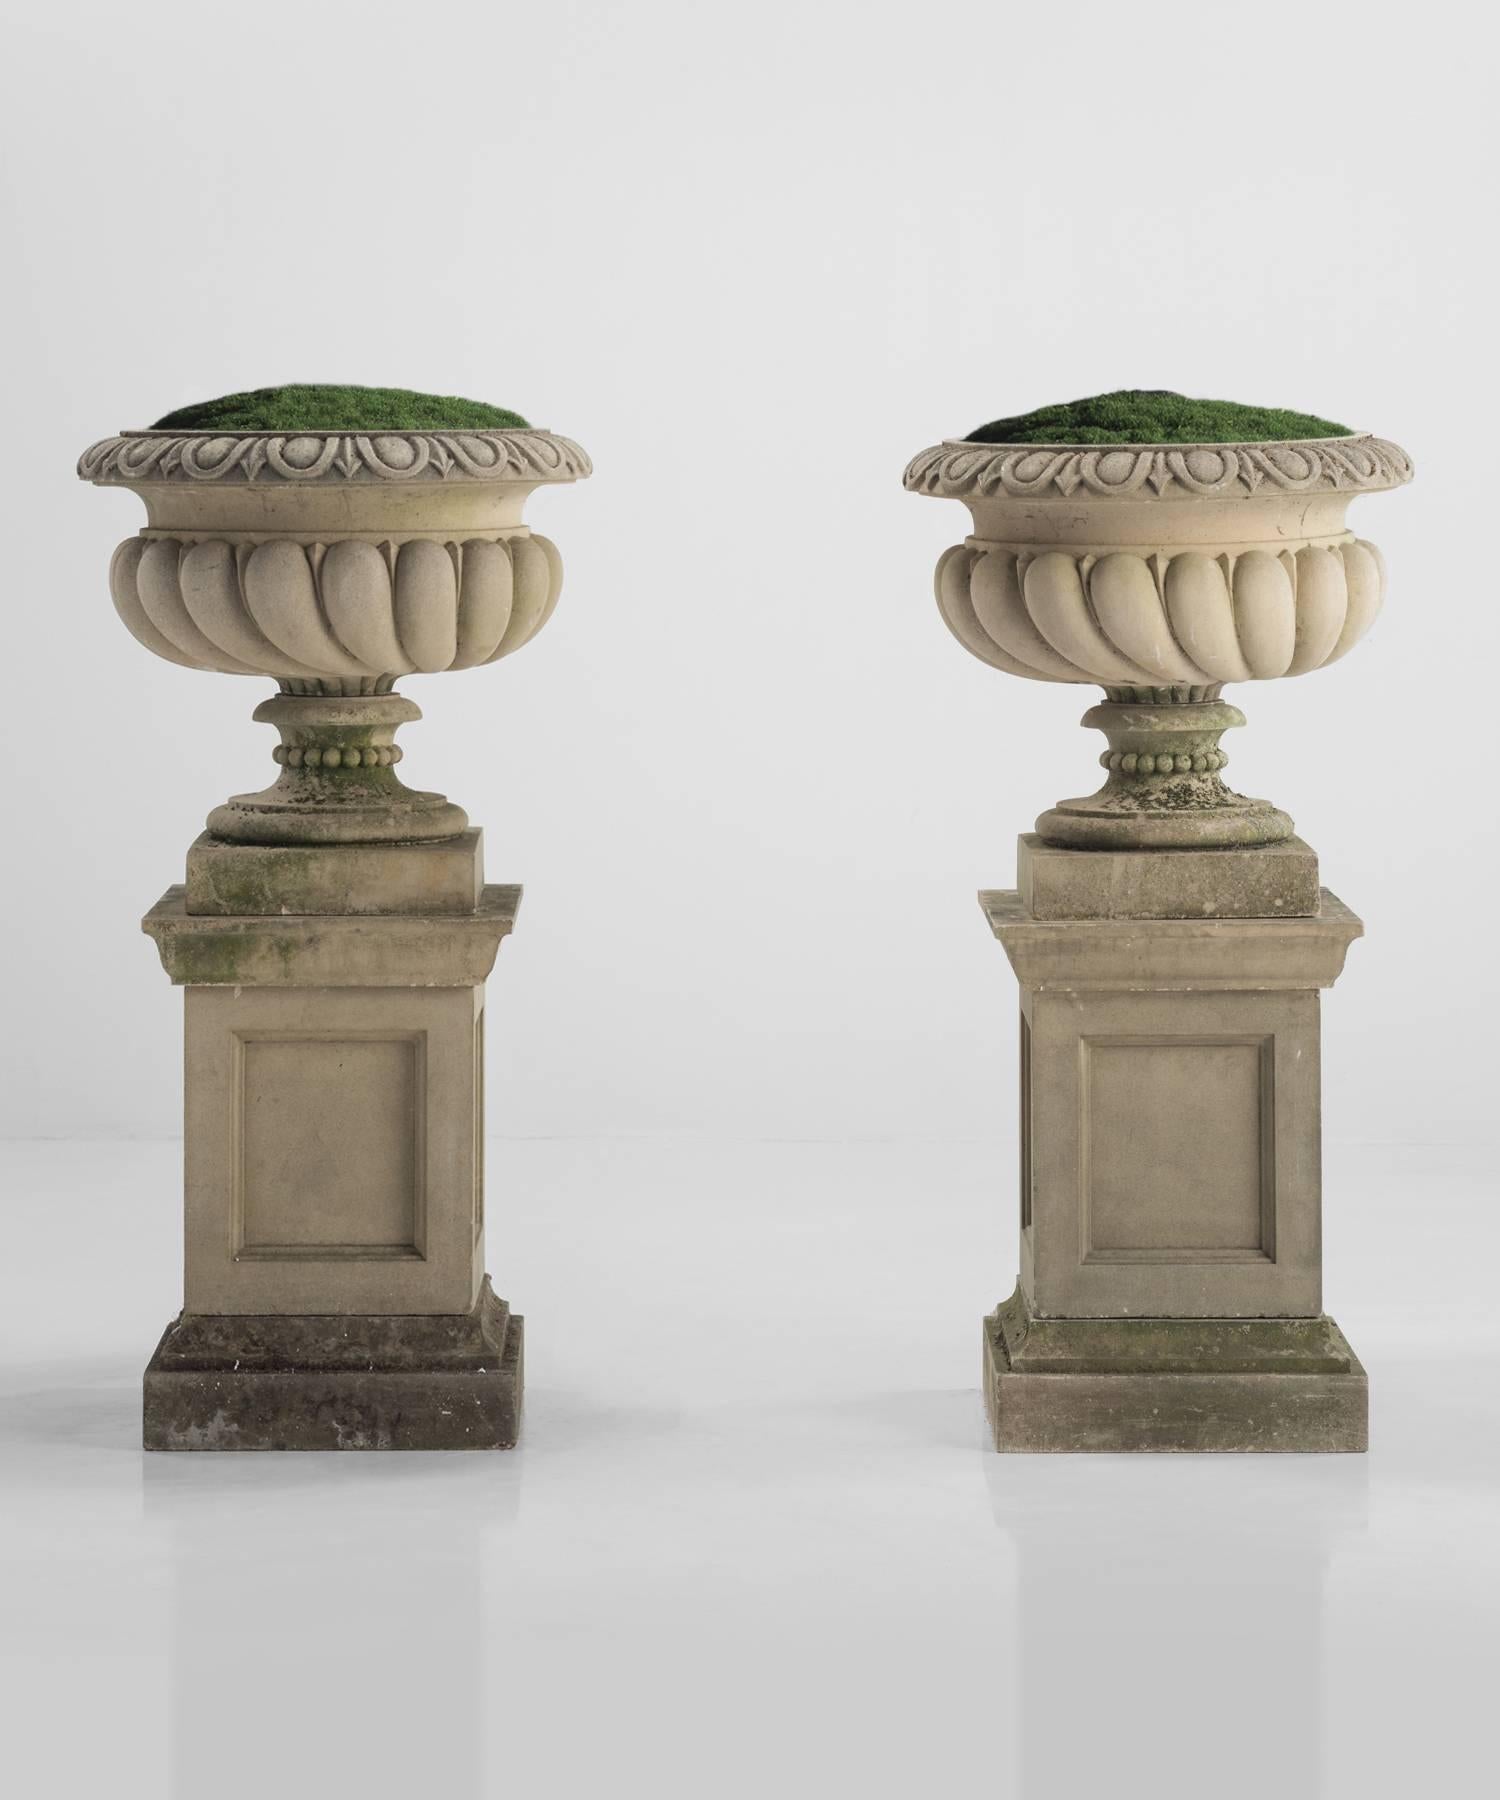 Pair of Large Westonbirt urns with pedestals, made of composite stone with beautifully weathered patina.

Made in England, circa 1975.